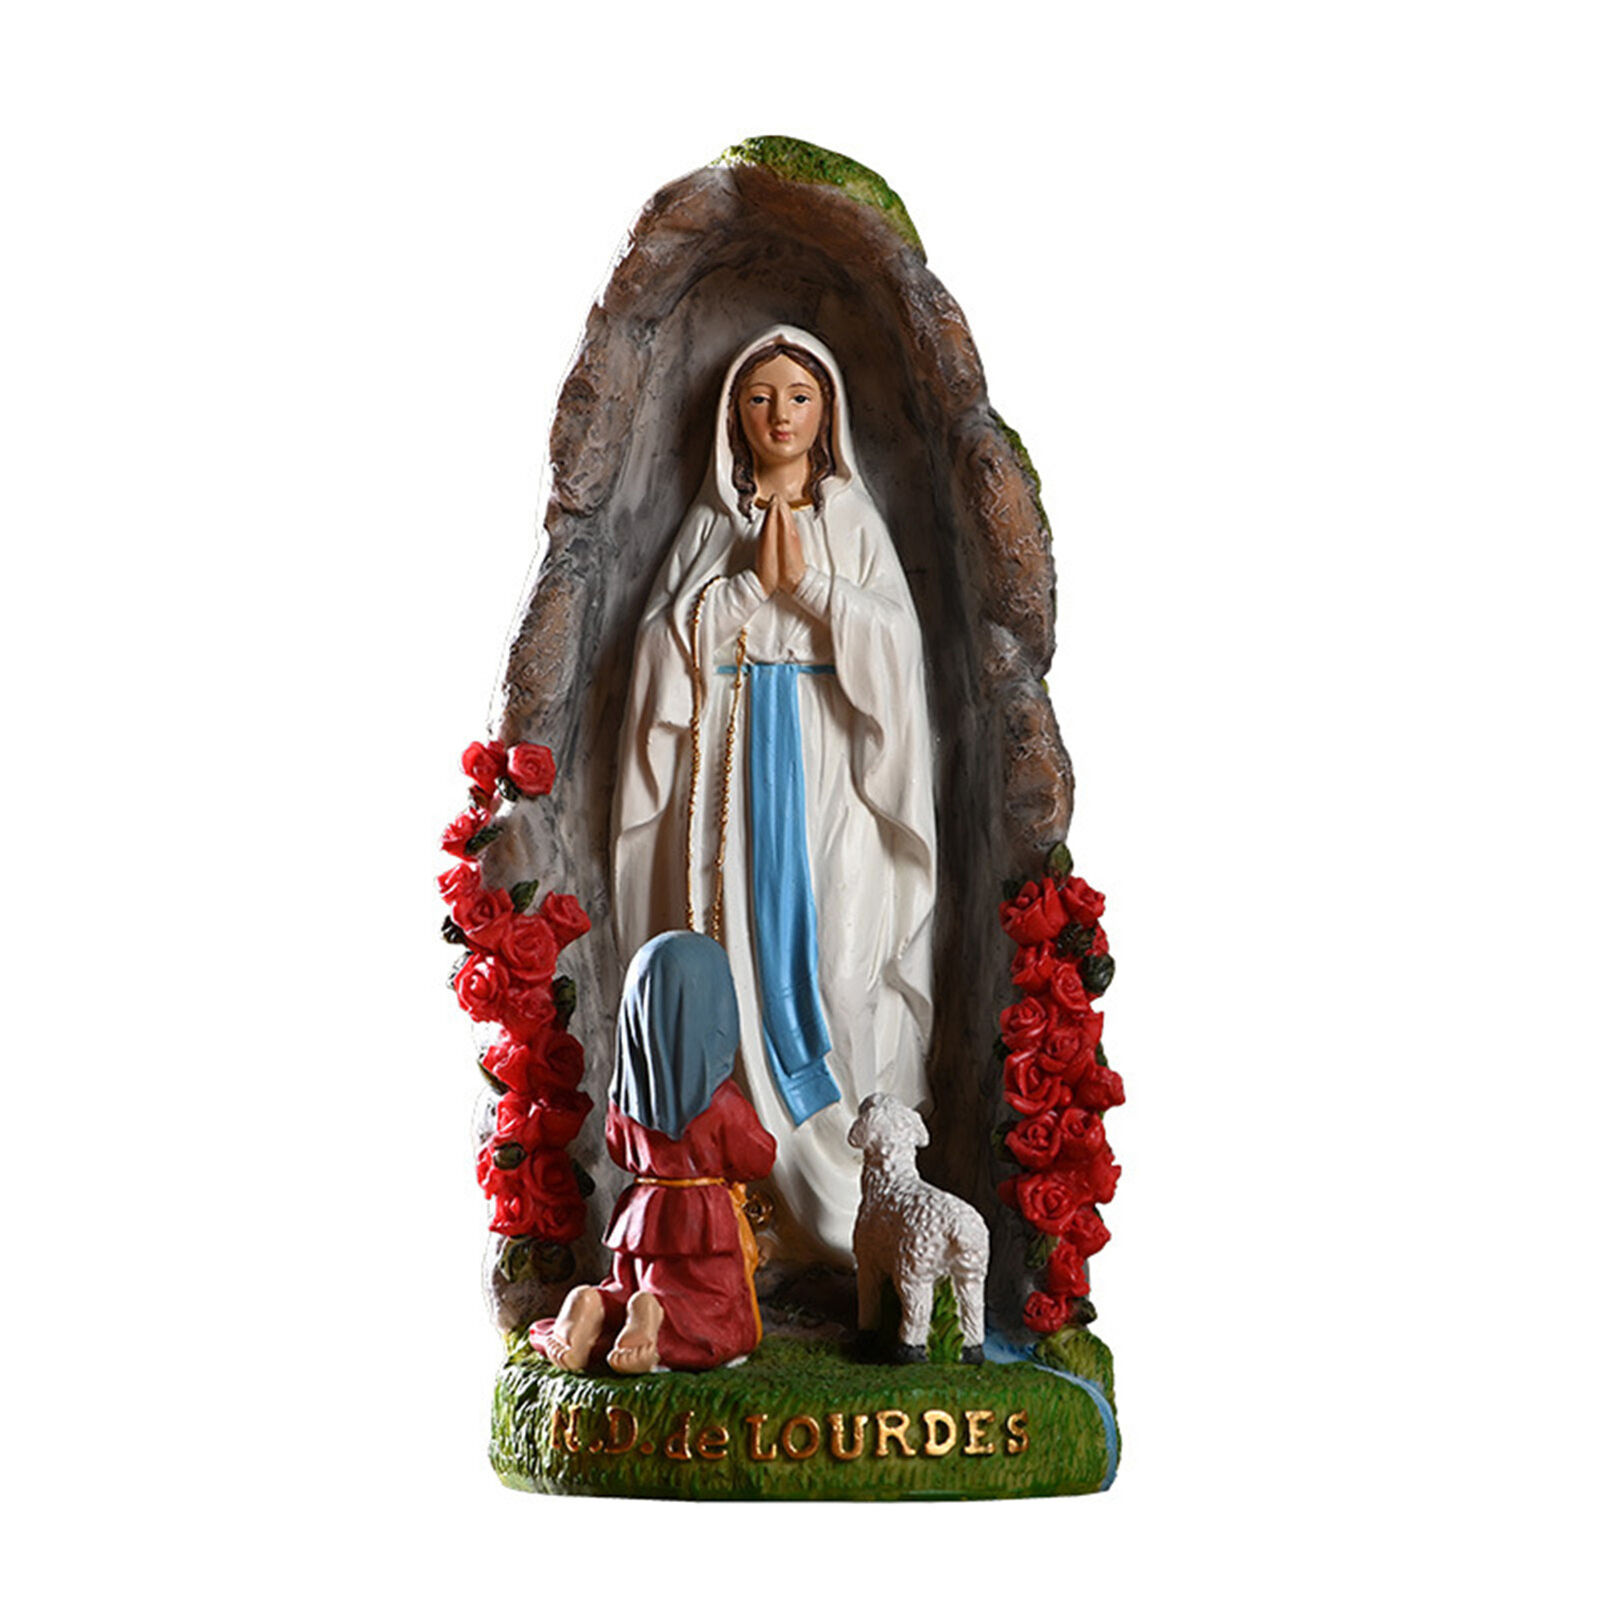 Virgin Mary Statue - Our Lady of Lourdes with St Bernadette and Lamb Figurines